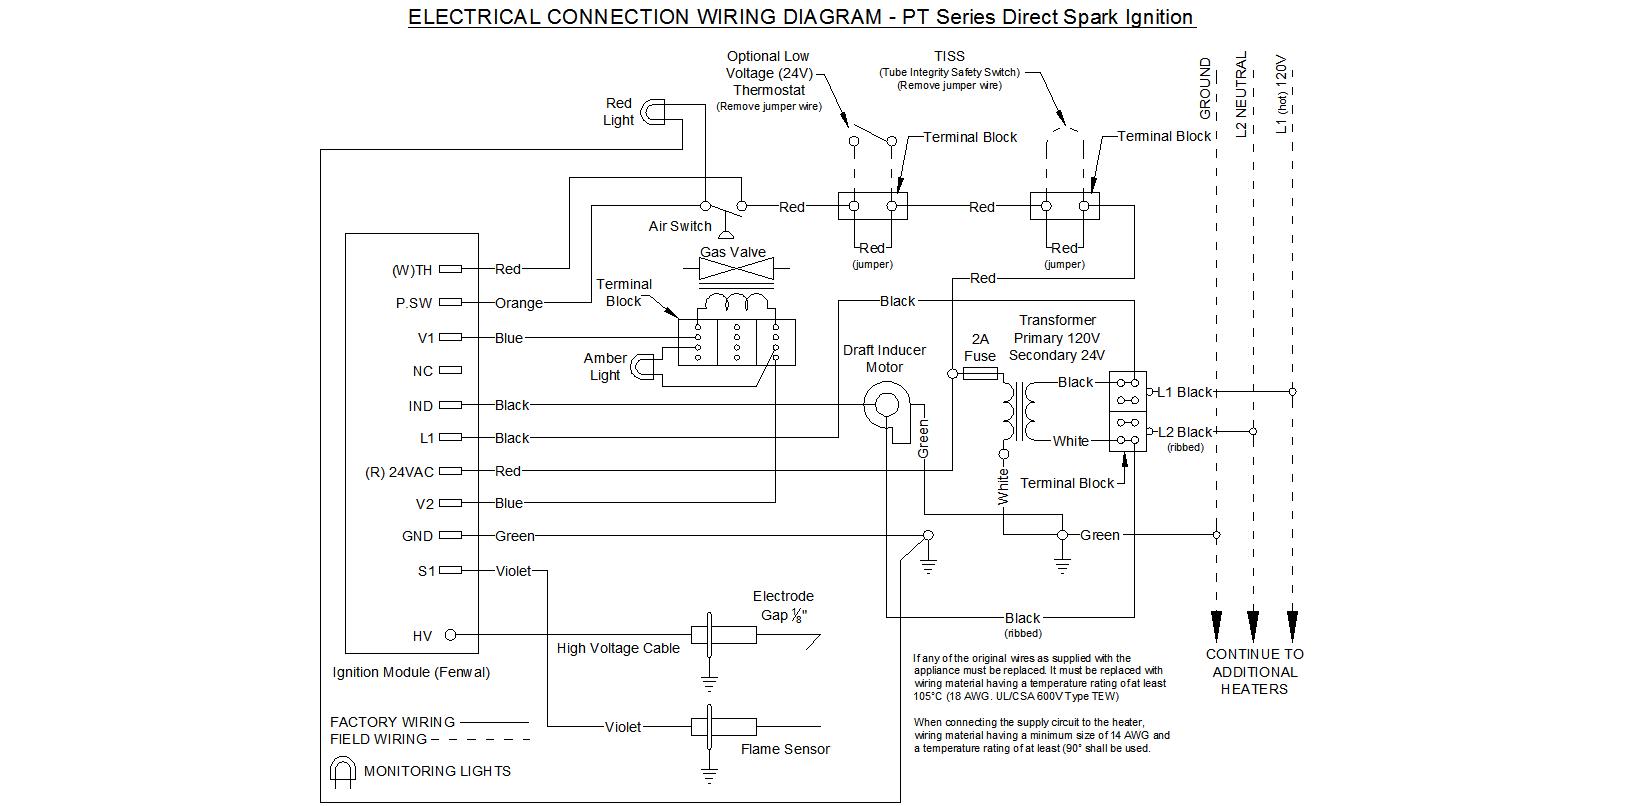 Industrial Electrical Wiring Diagram Pdf from www.spaceray.com